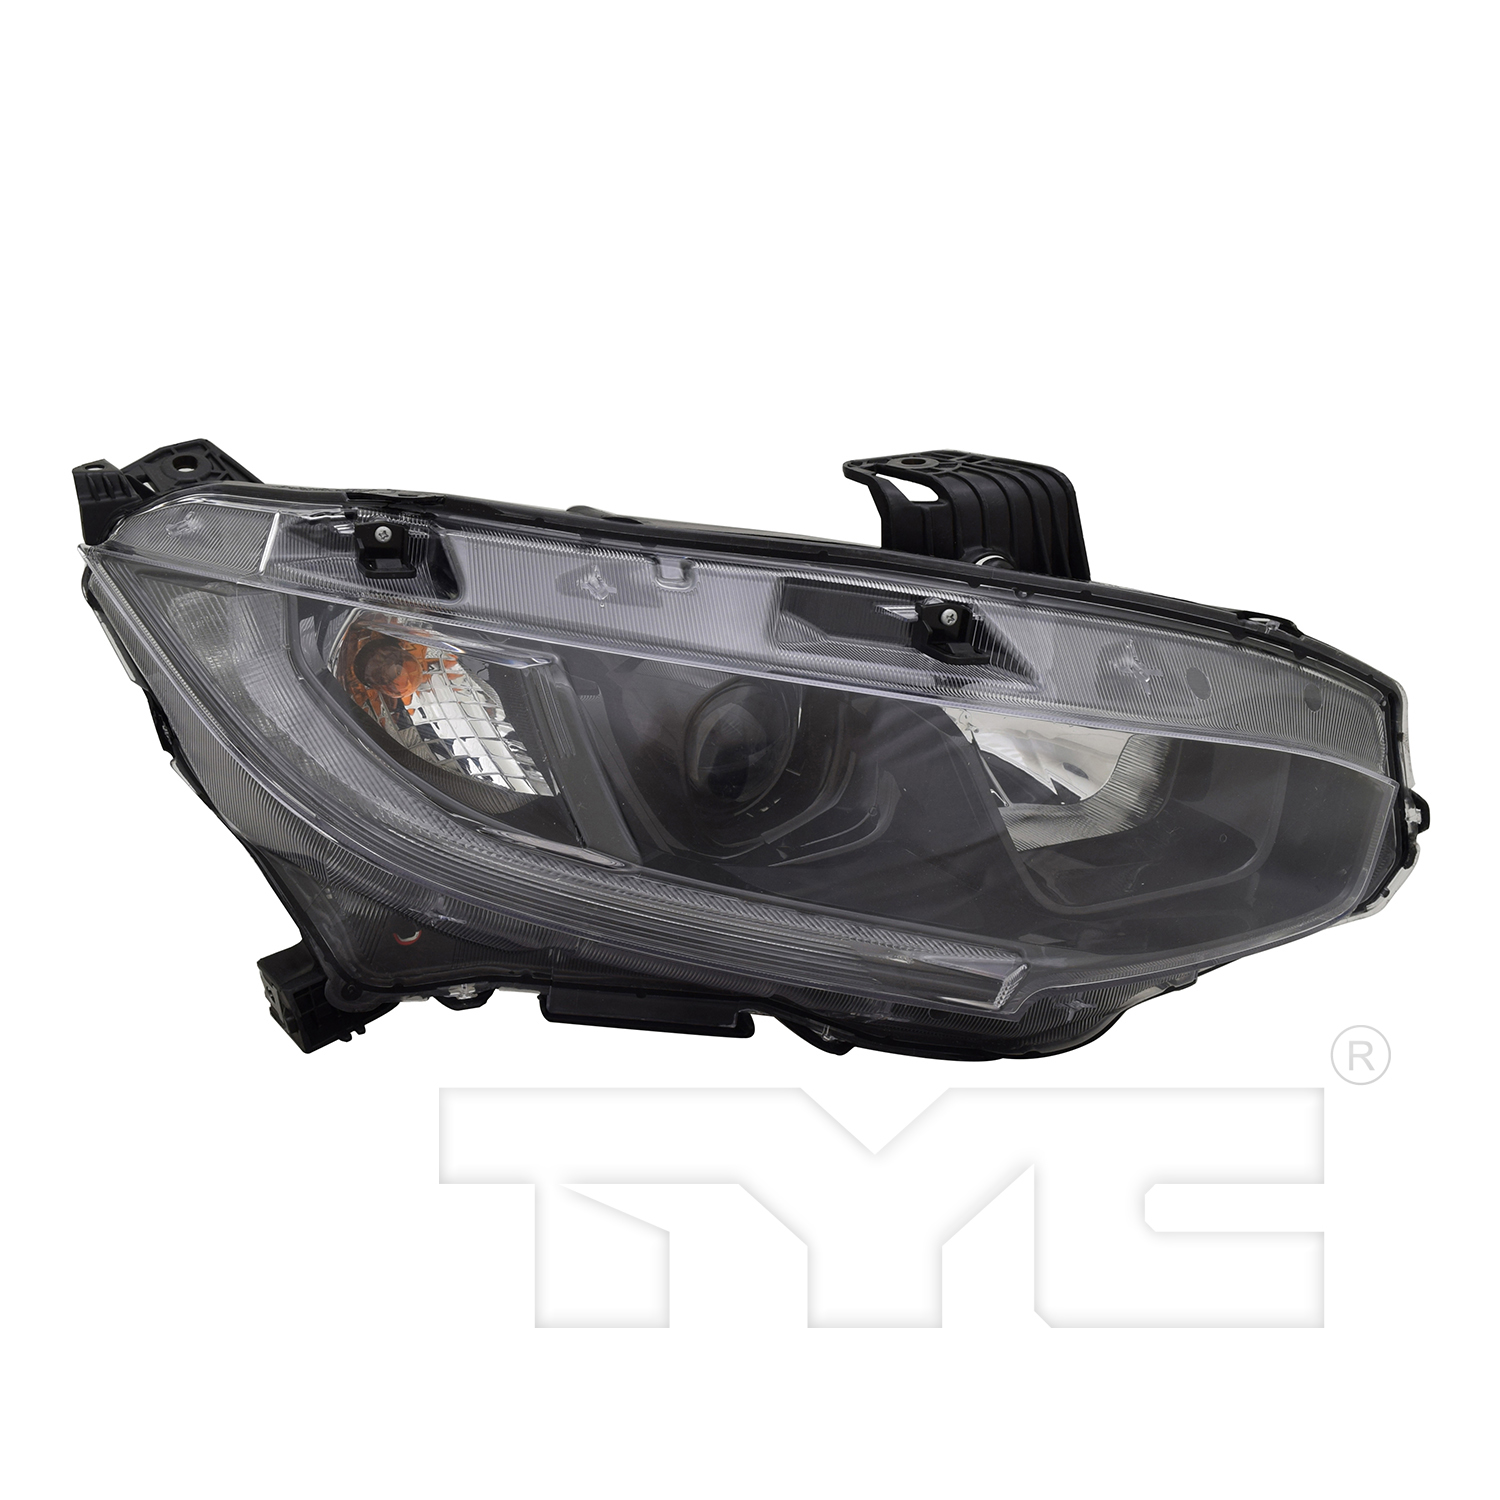 Aftermarket HEADLIGHTS for HONDA - CIVIC, CIVIC,19-21,RT Headlamp assy composite